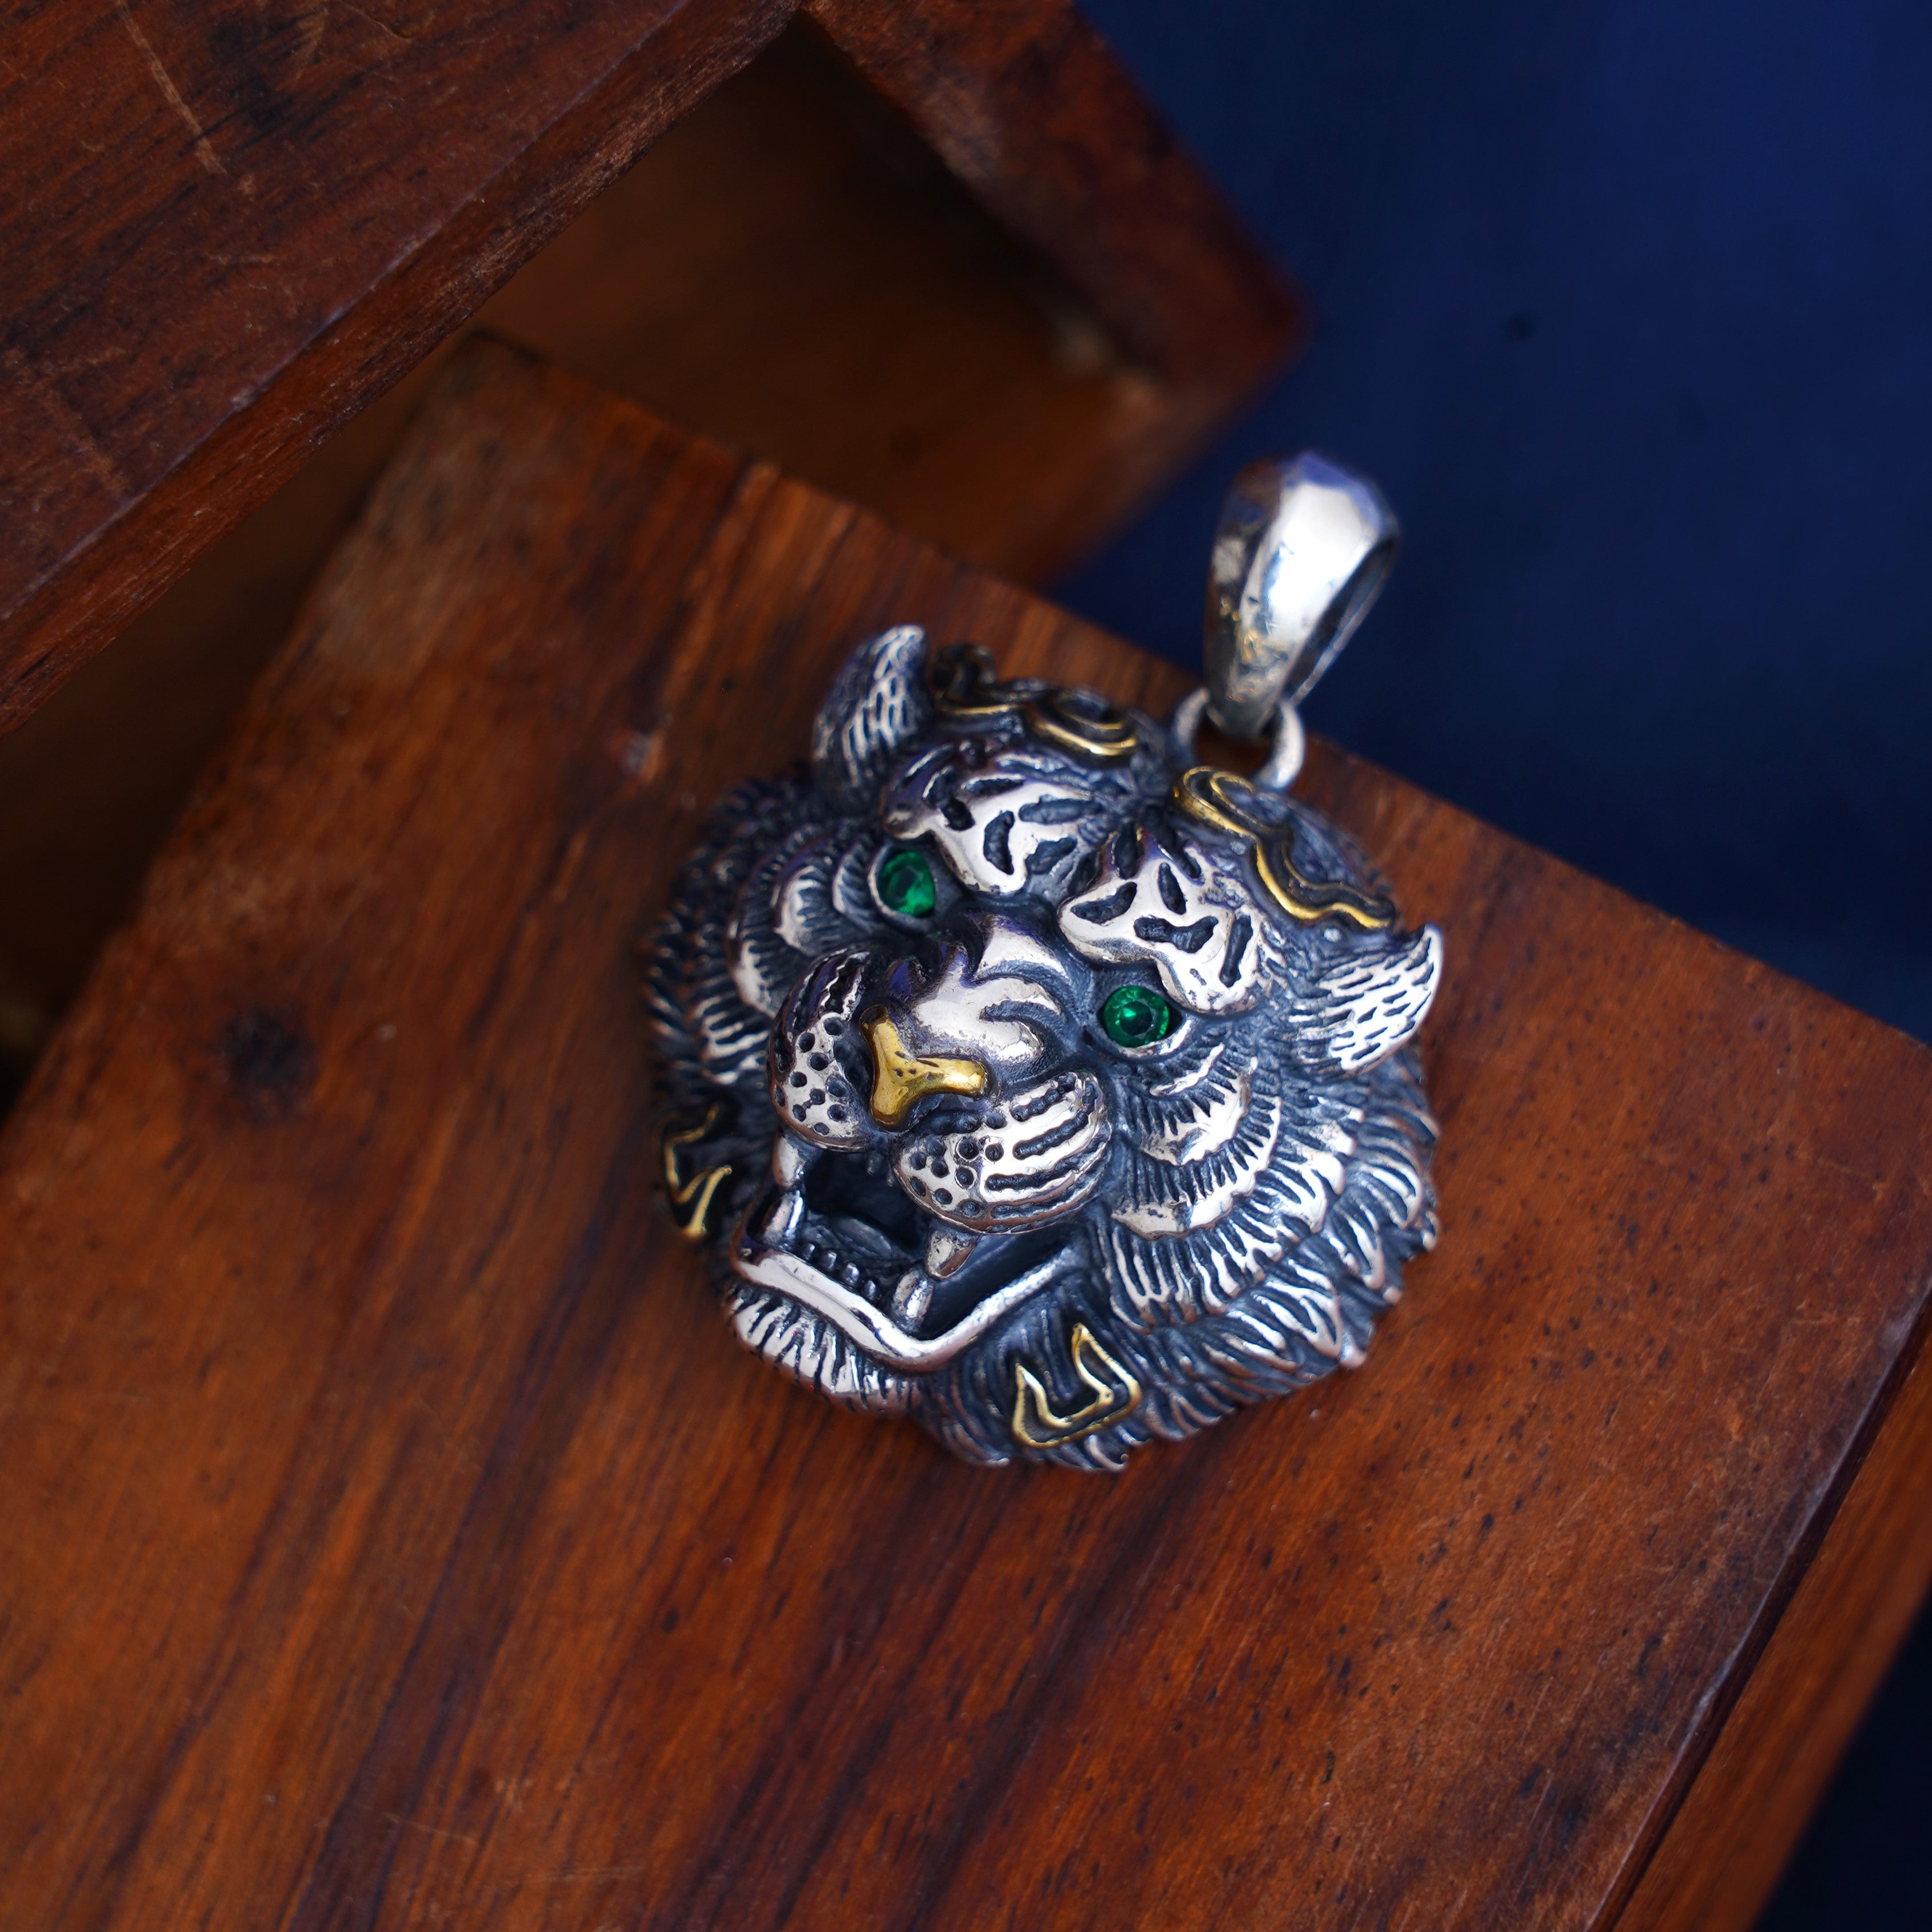 Buy Lion Necklace, 925 Sterling Silver Jewelry, Gift Men's Pendant With  Chain Pendant Lion Pendant, Gift for Boyfriend Girlfriend Online in India -  Etsy